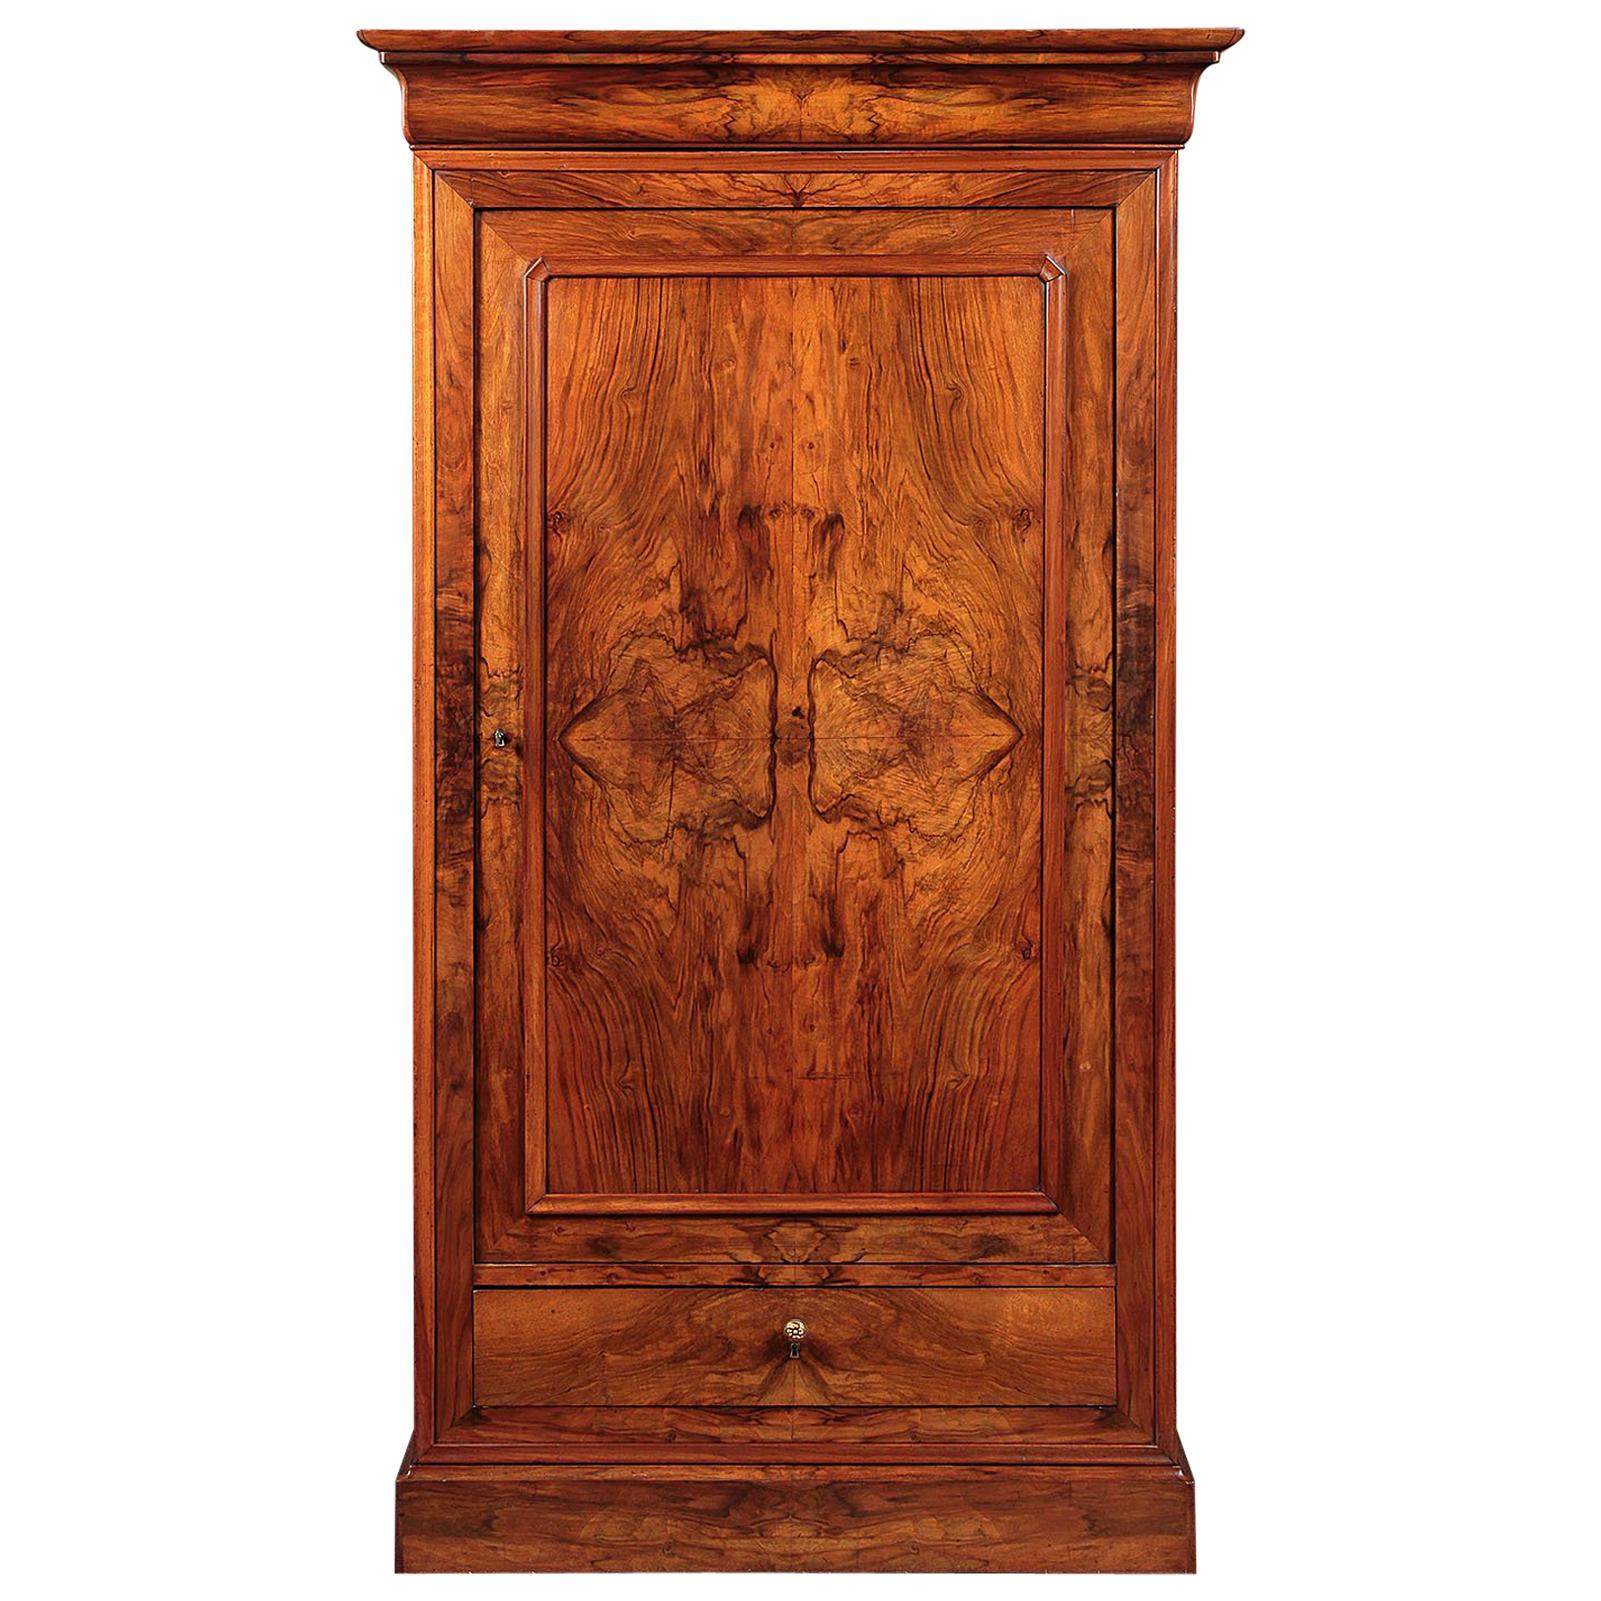 Early 19th Century French Walnut Linen Press or Hall Cupboard